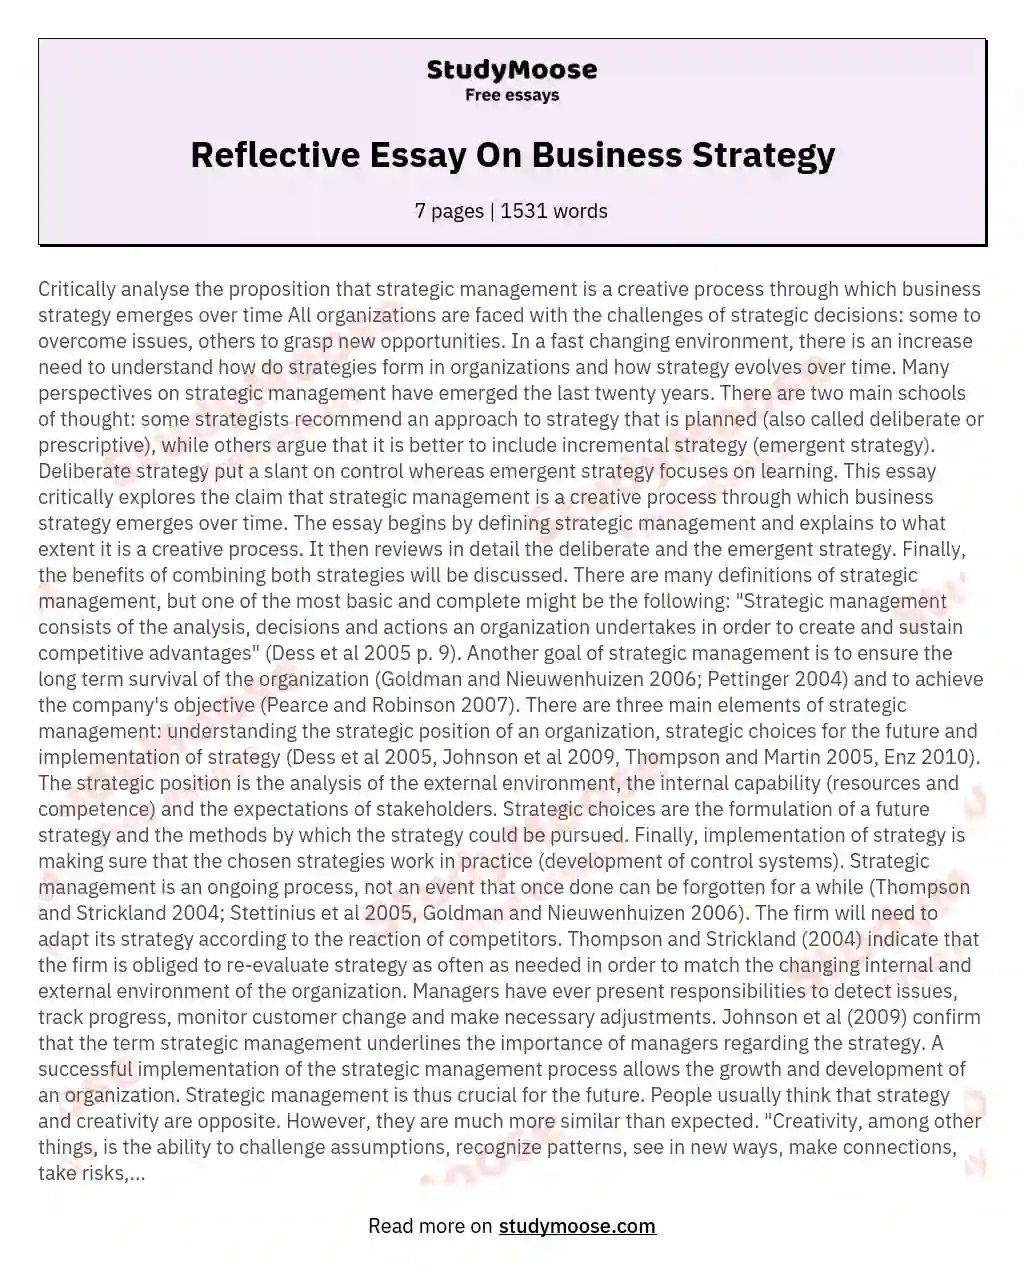 Reflective Essay On Business Strategy essay